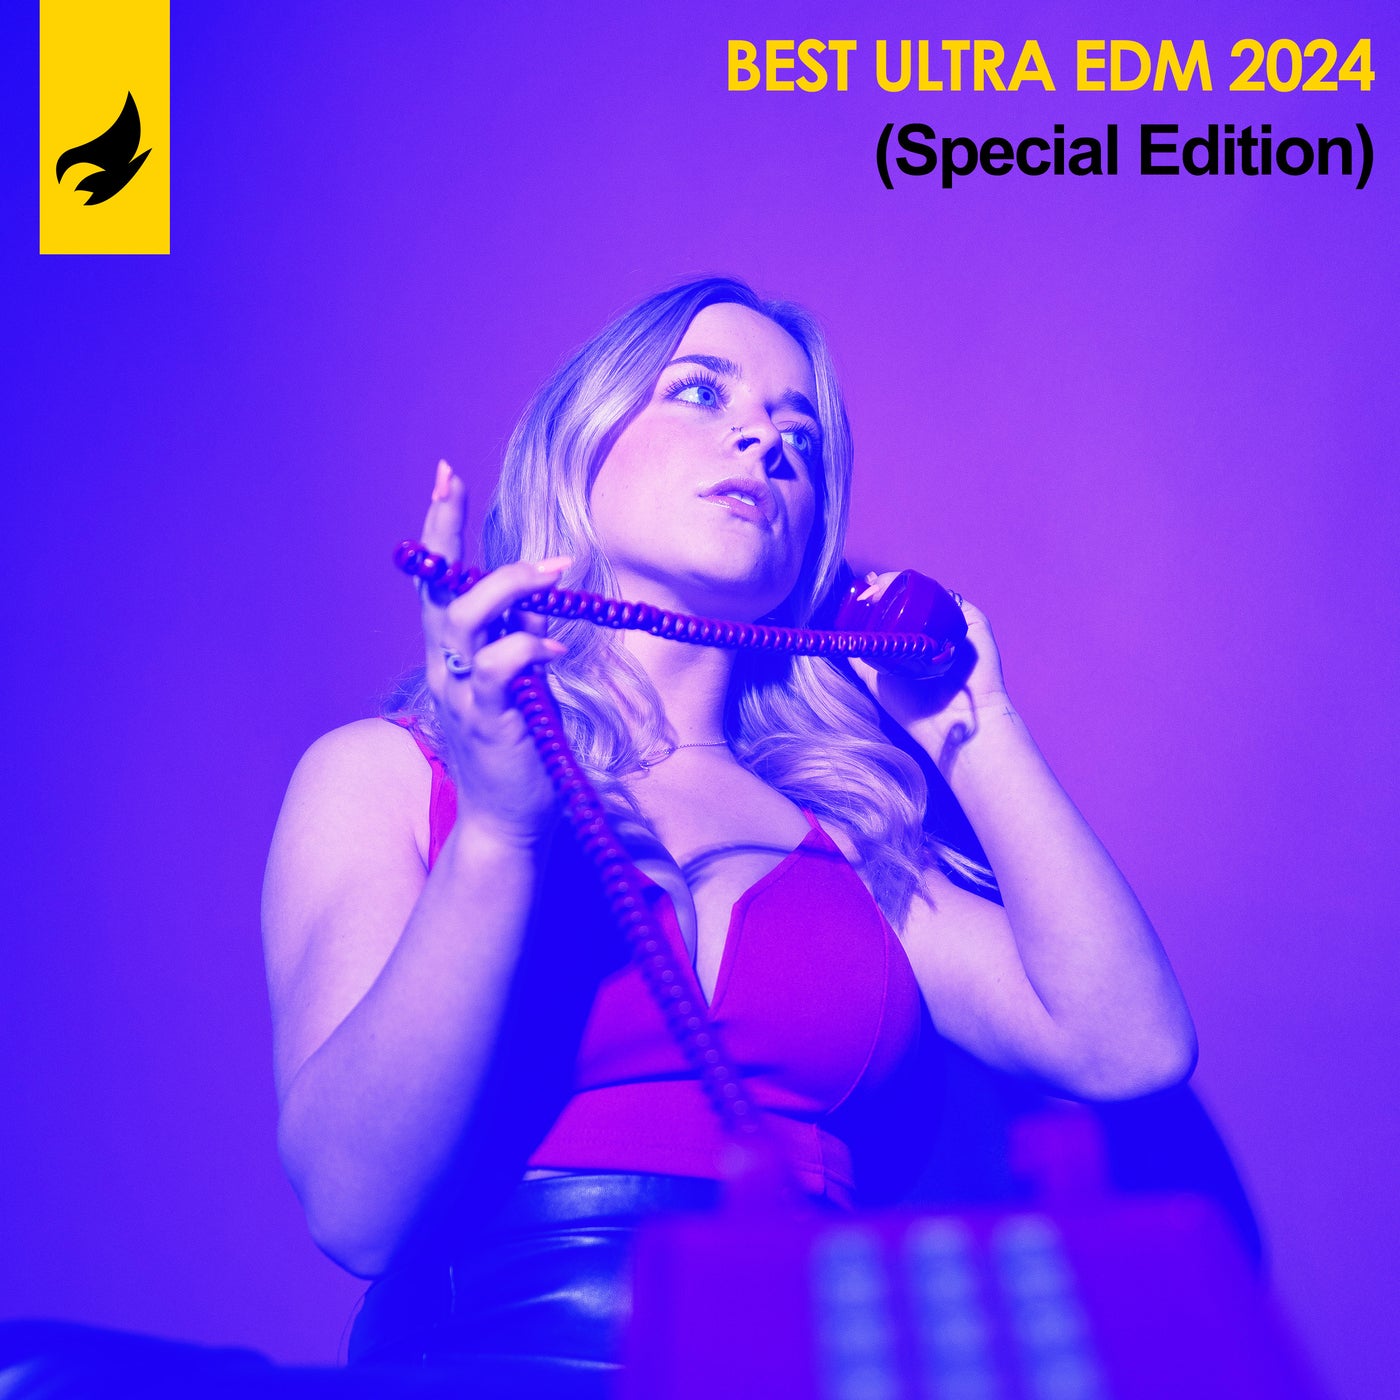 Best Ultra EDM 2024 (Special Edition)